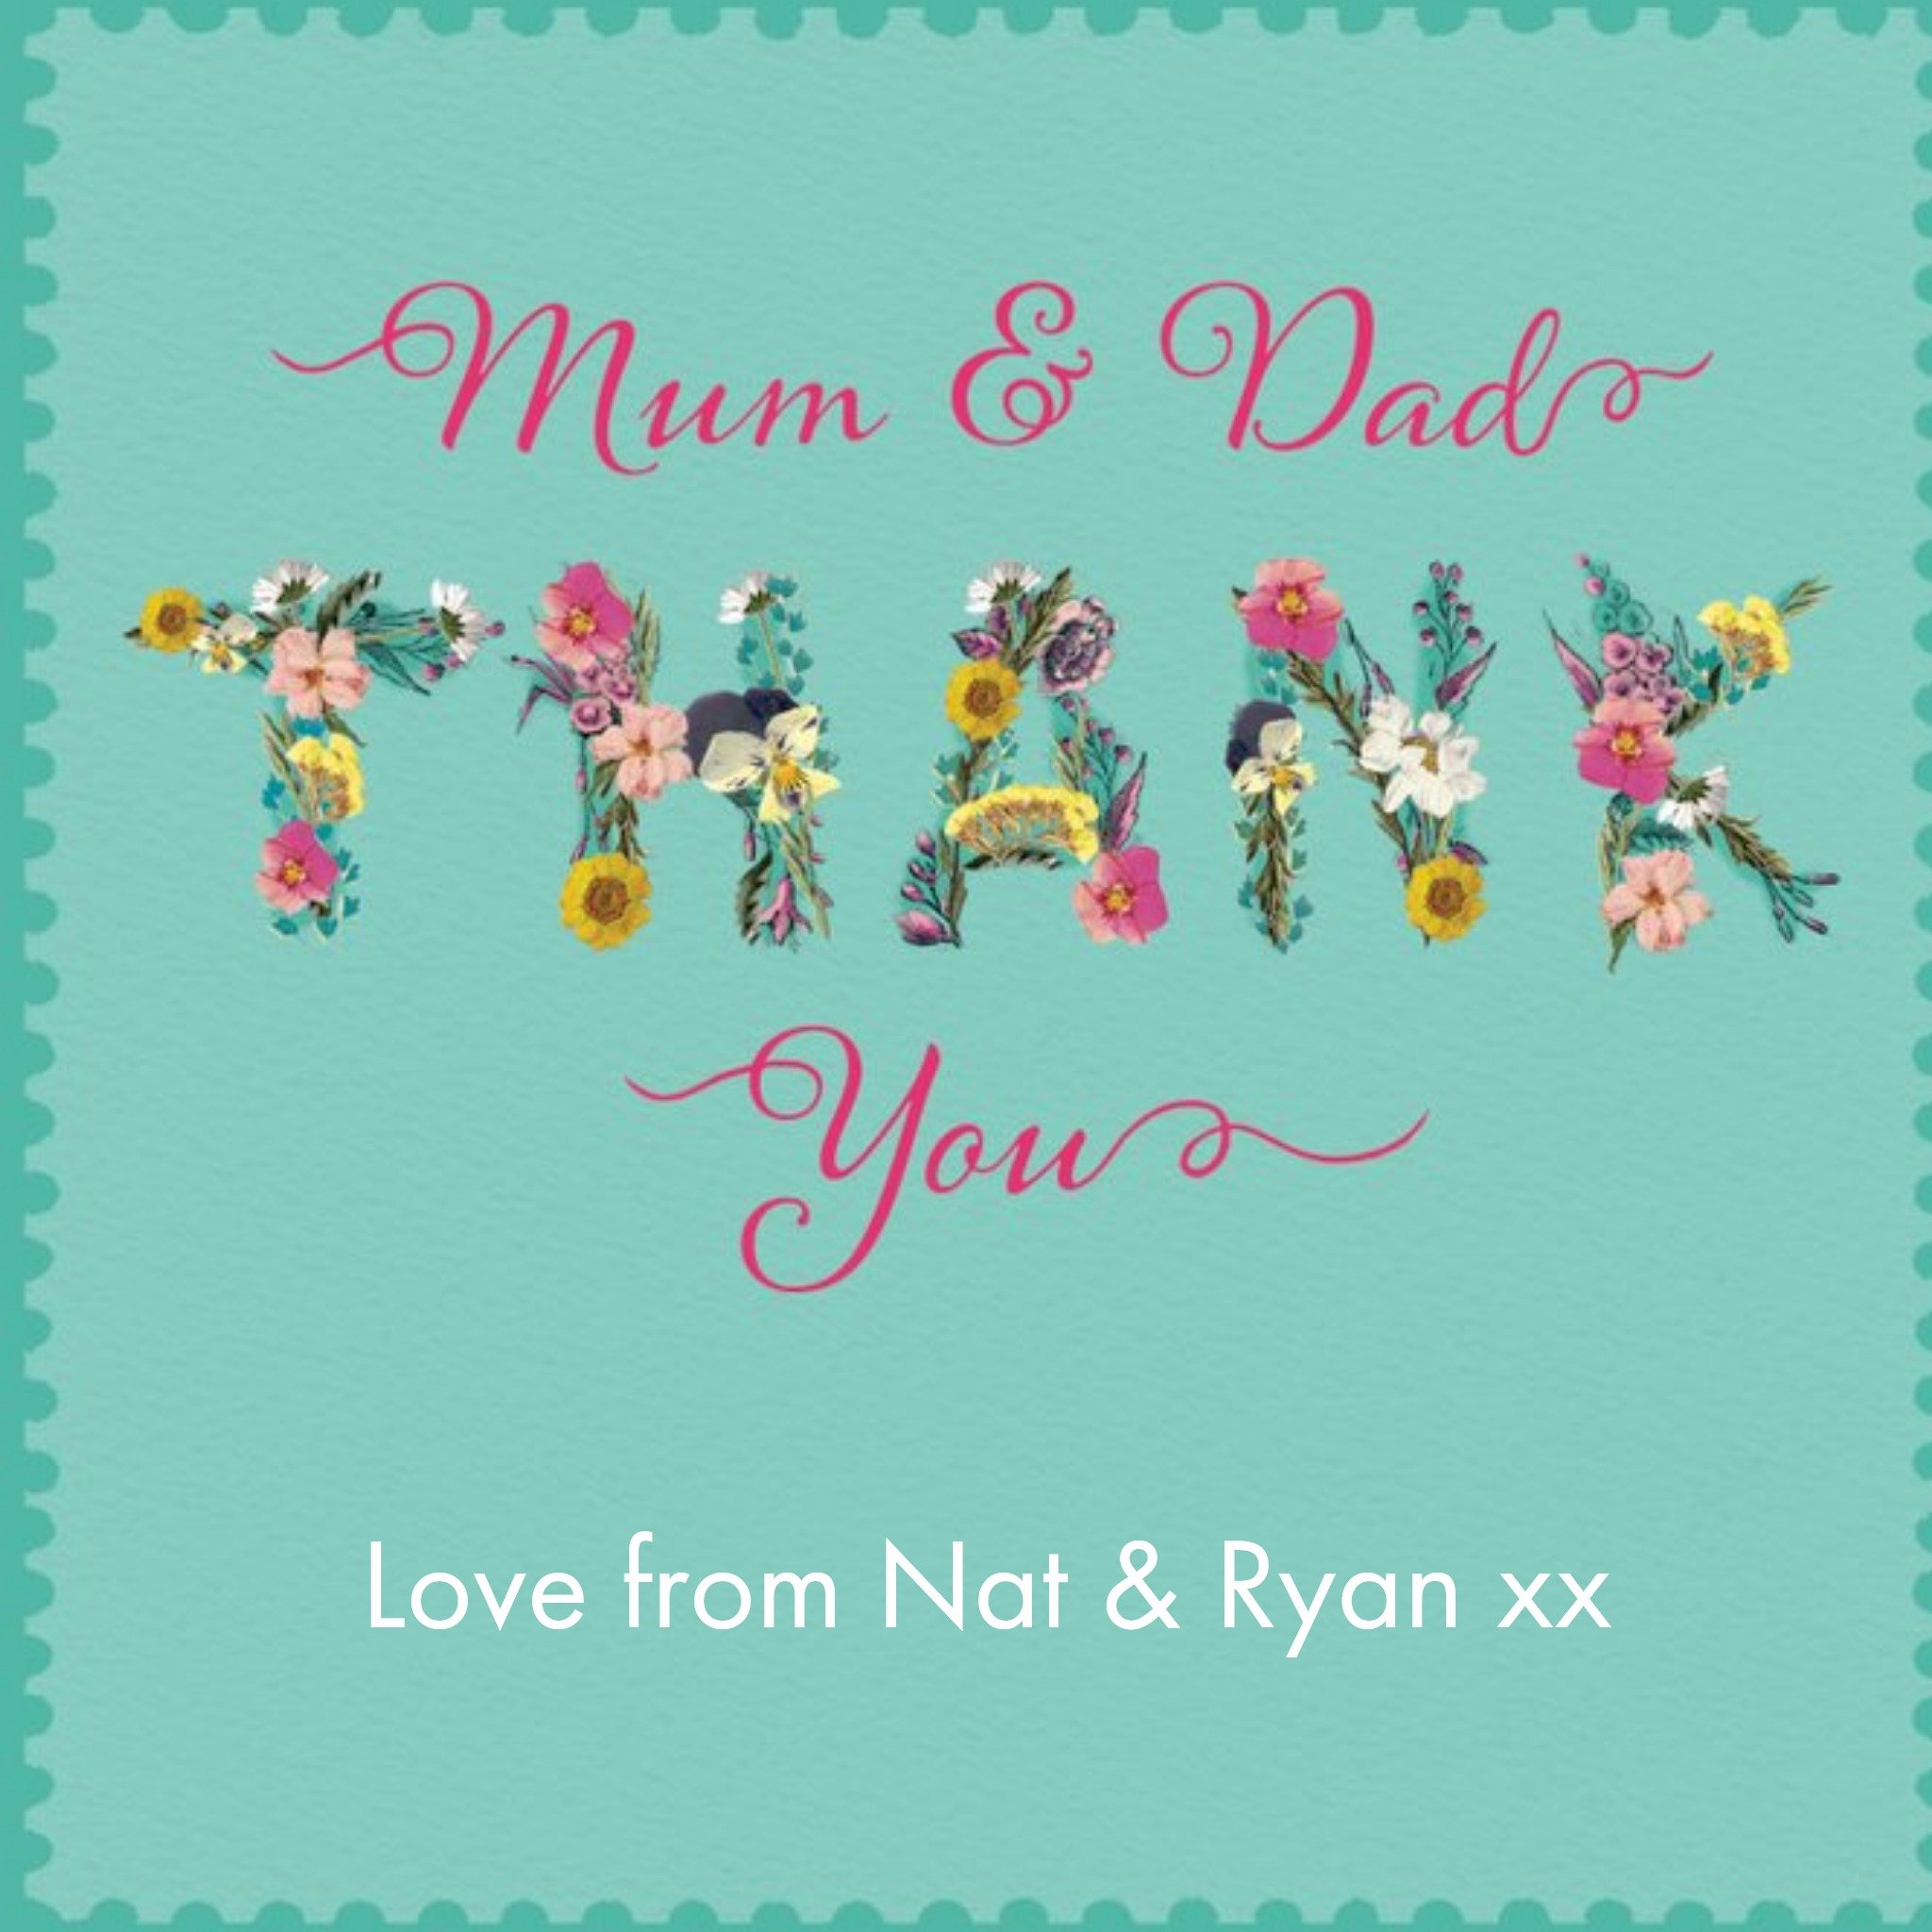 Moonpig Illustration Of Floral Lettering On A Teal Background Thank You Mum And Dad Card, Square